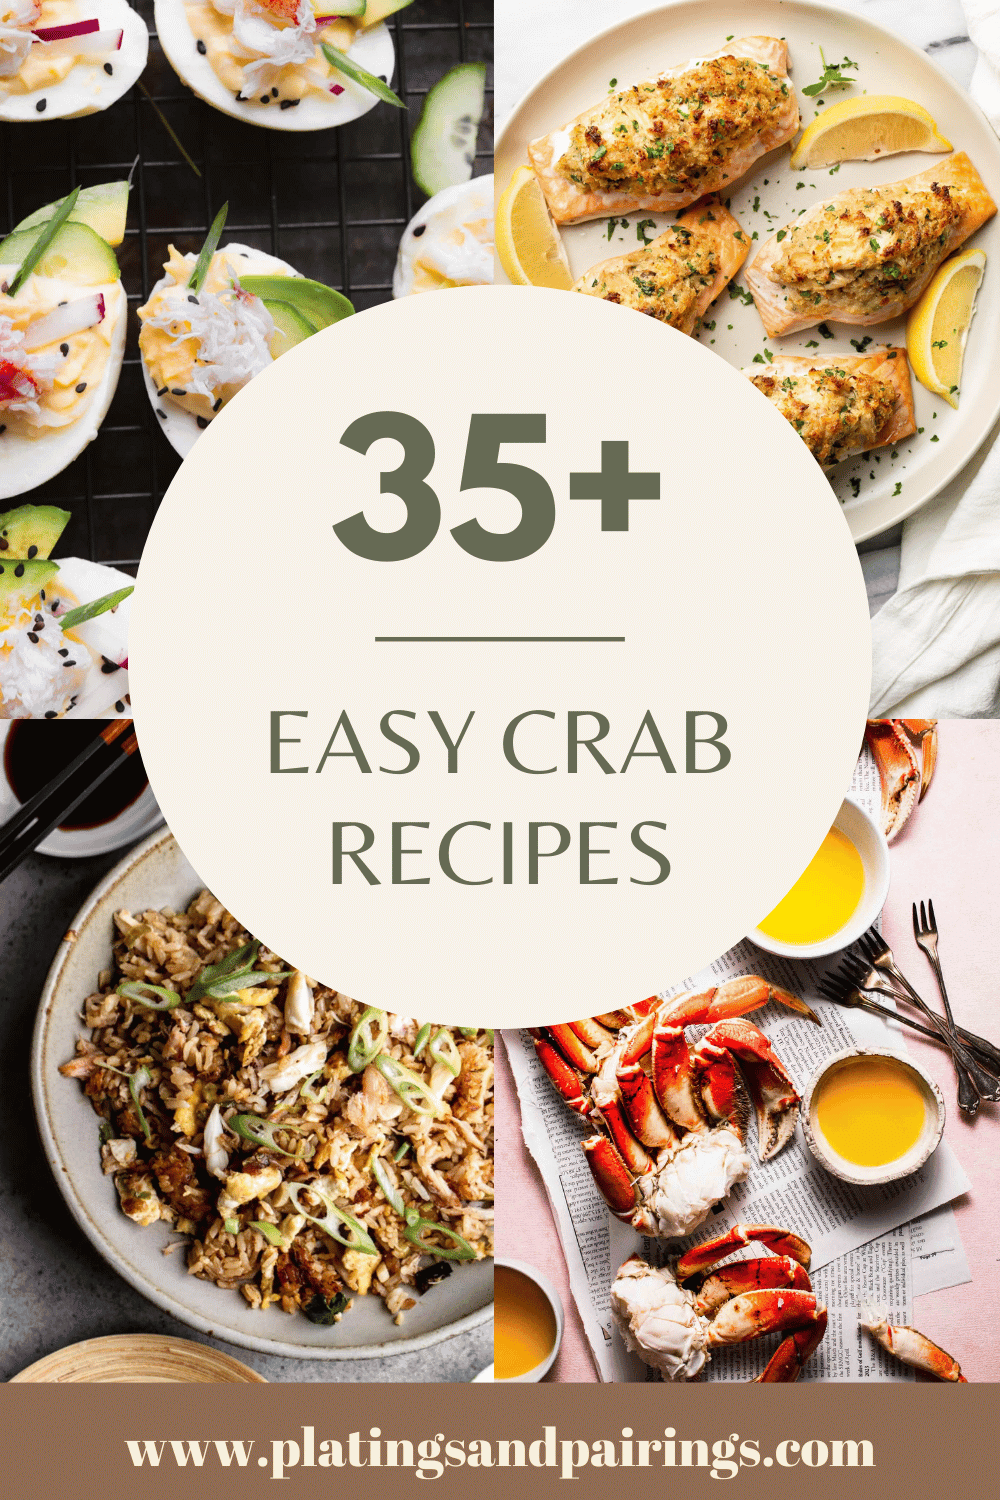 Collage of crab recipes with text overlay.